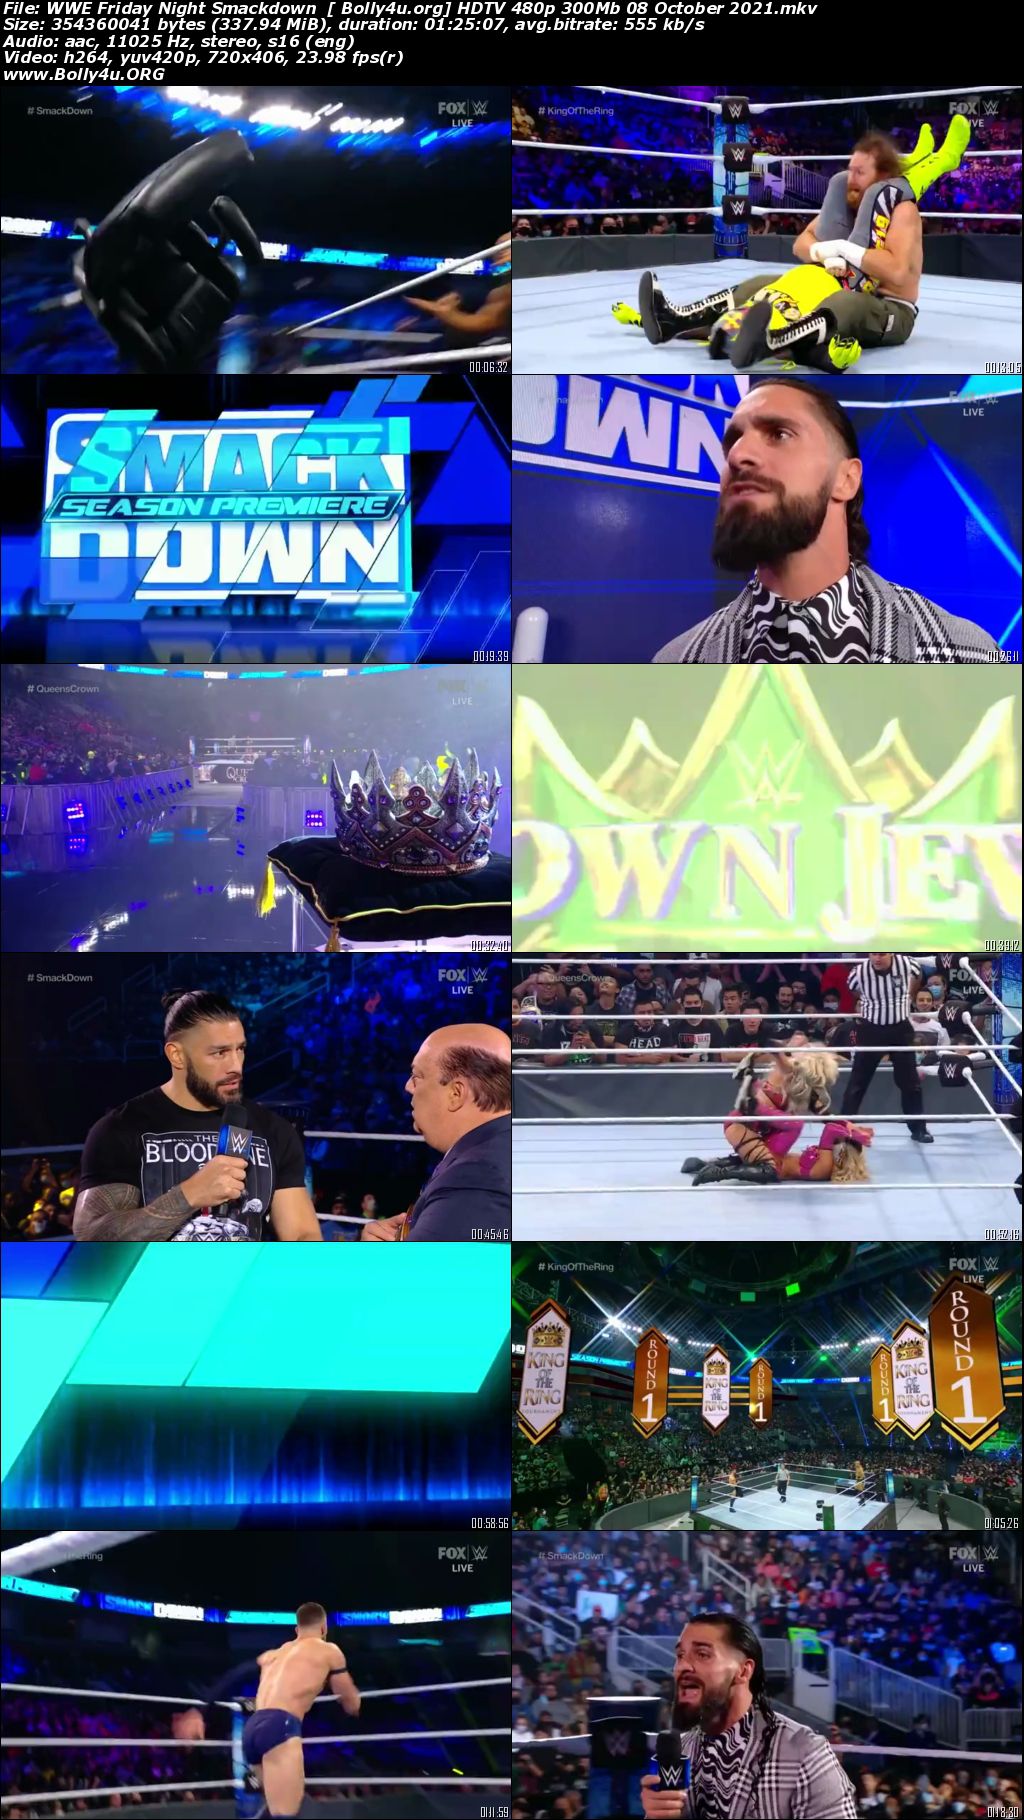 WWE Friday Night Smackdown HDTV 480p 300Mb 08 October 2021 Download